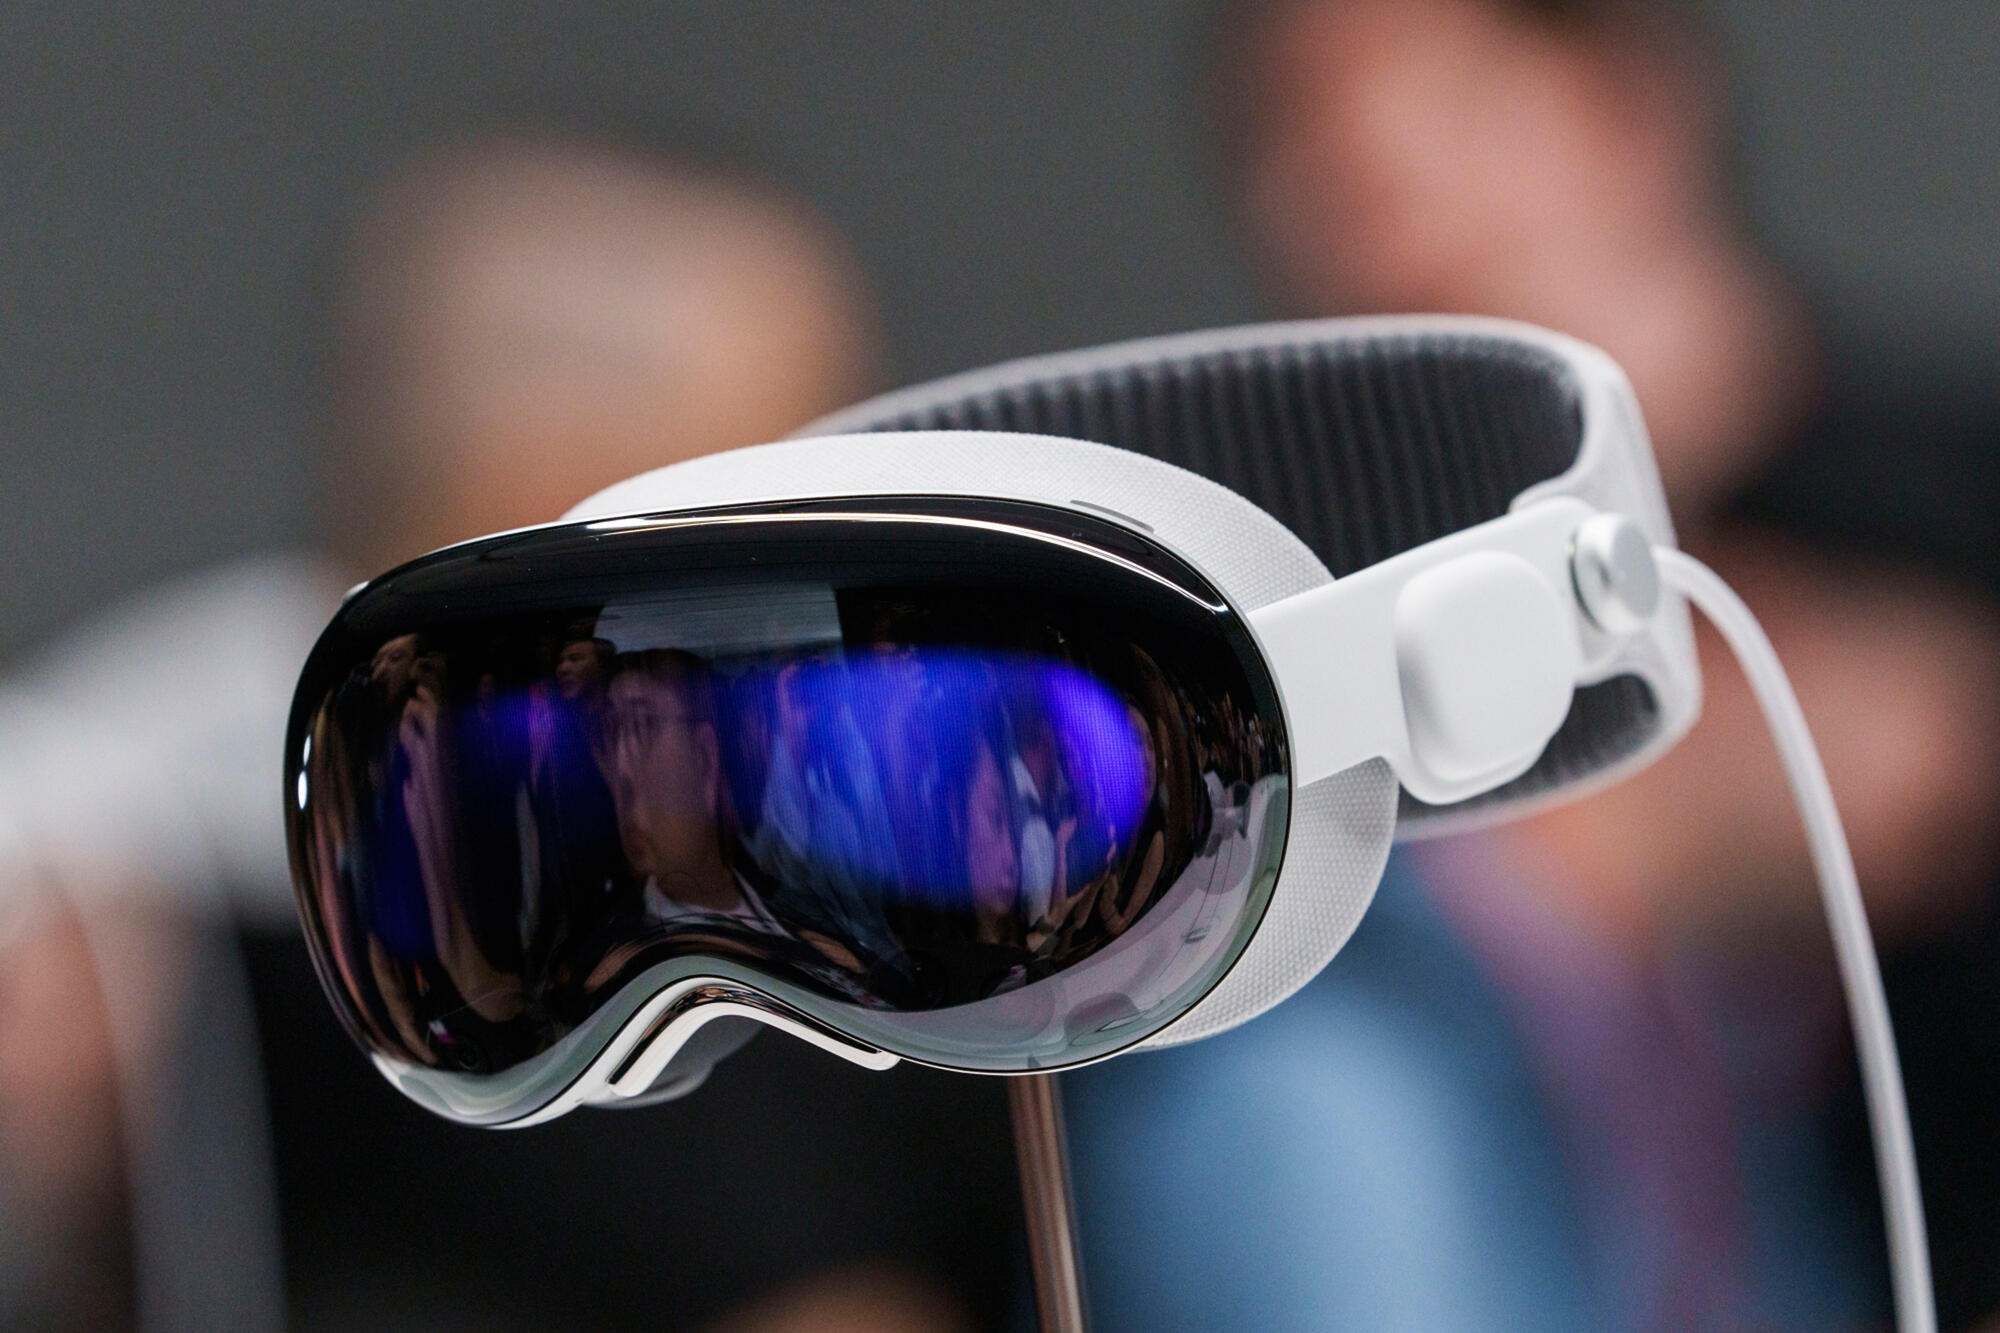 Smart Glasses: A Short-lived Fad or the Future?